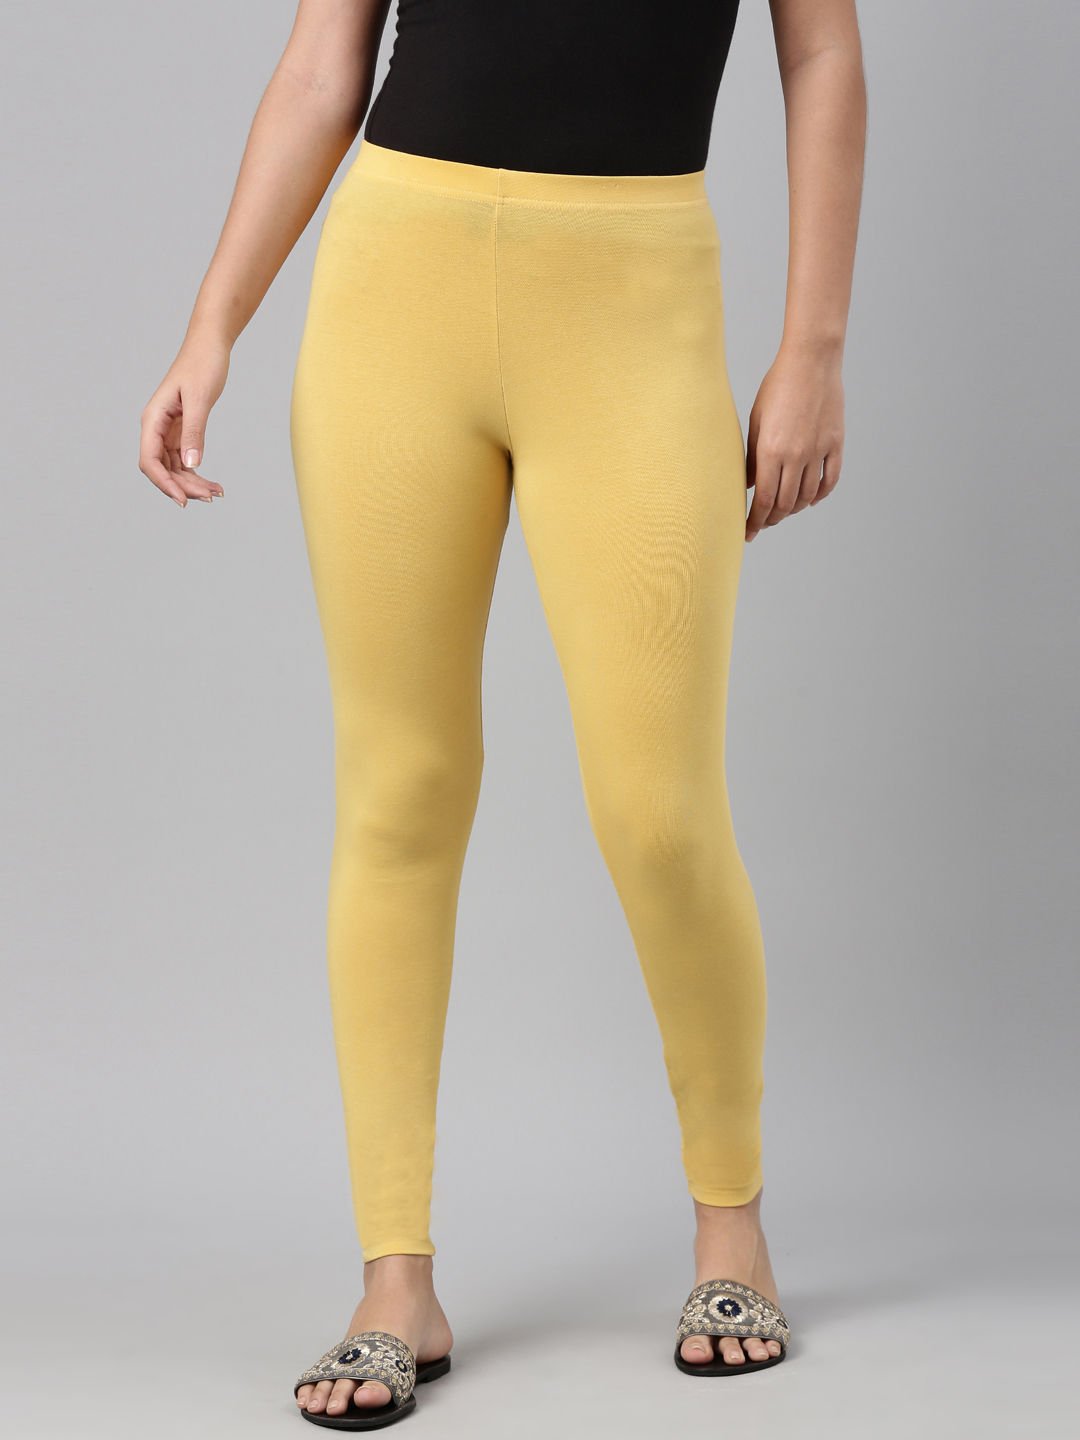 Buy Mustard Yellow Cotton Solid Tights Online - W for Woman